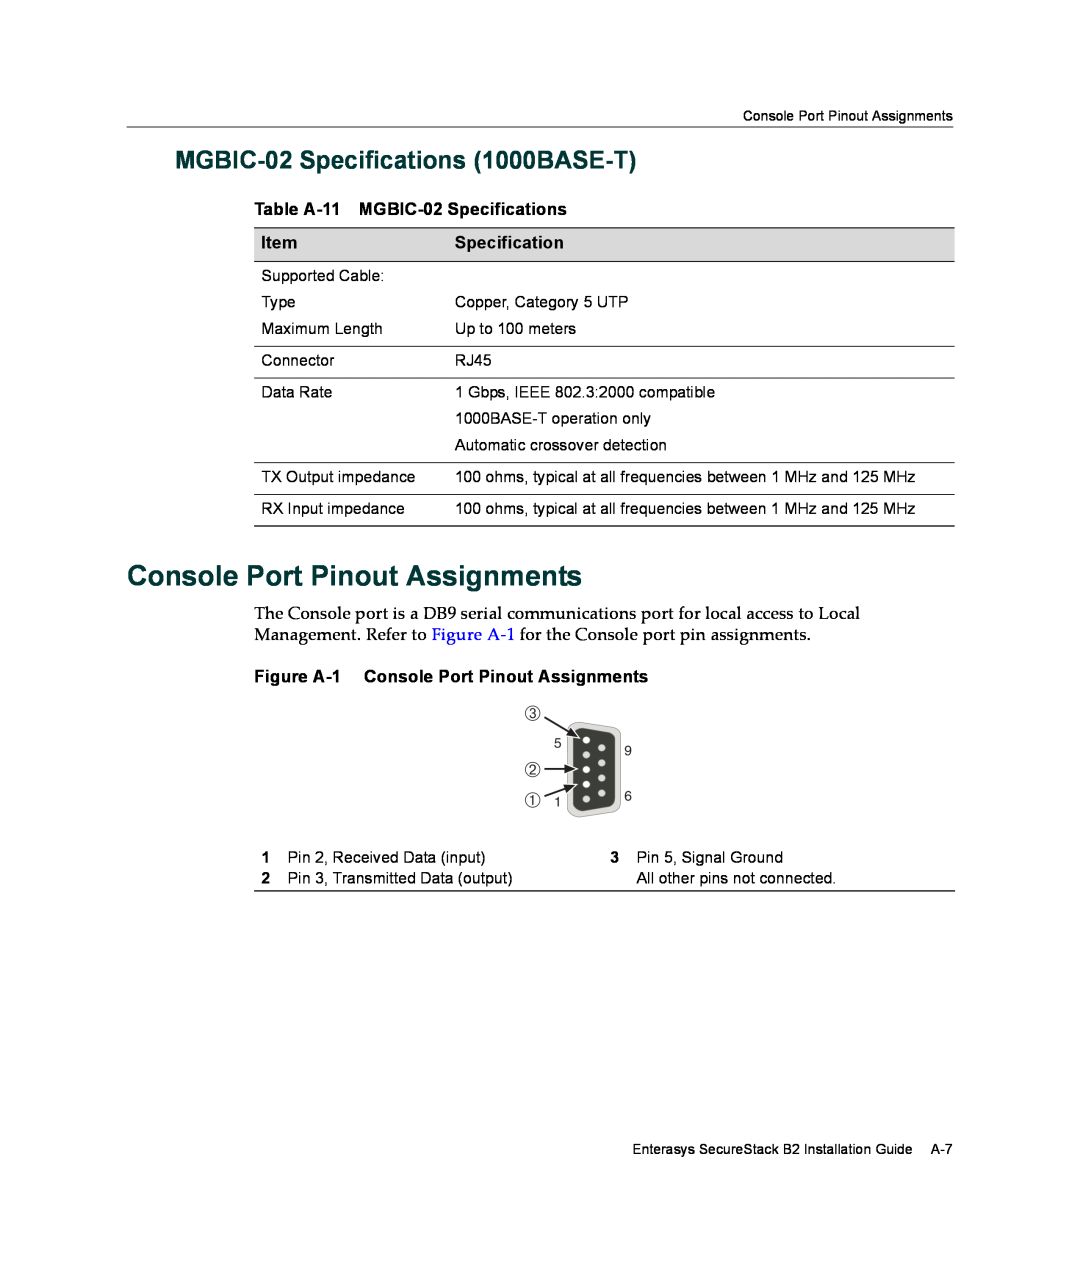 Enterasys Networks B2G124-24 manual Console Port Pinout Assignments, MGBIC-02 Specifications 1000BASE-T 